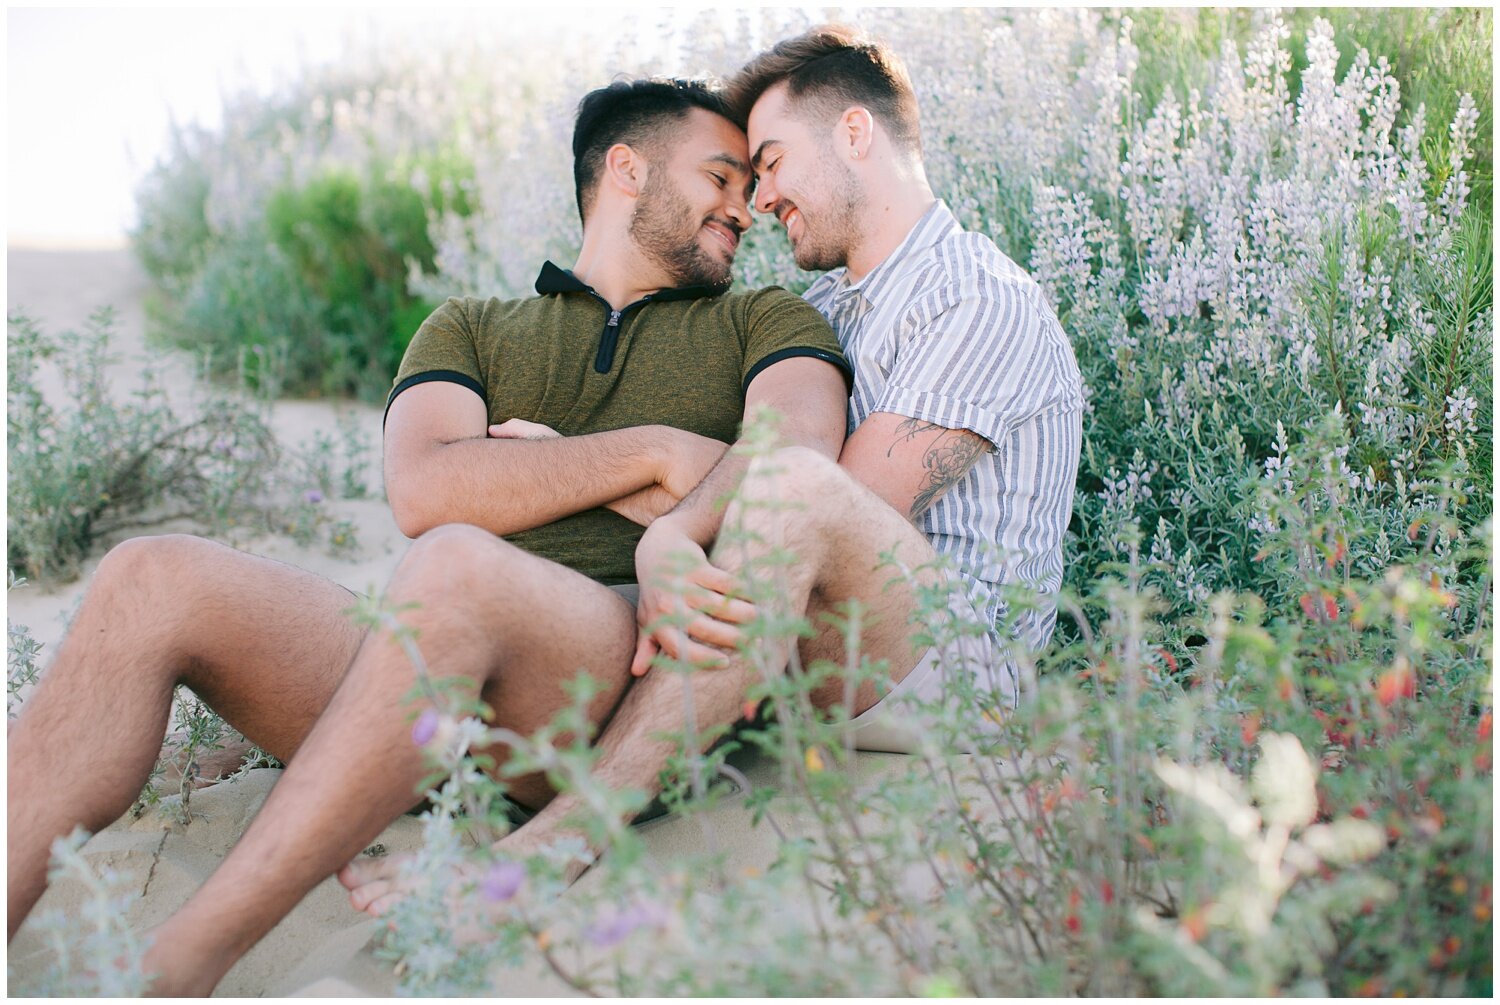 Gay Men Engagement session at the beach